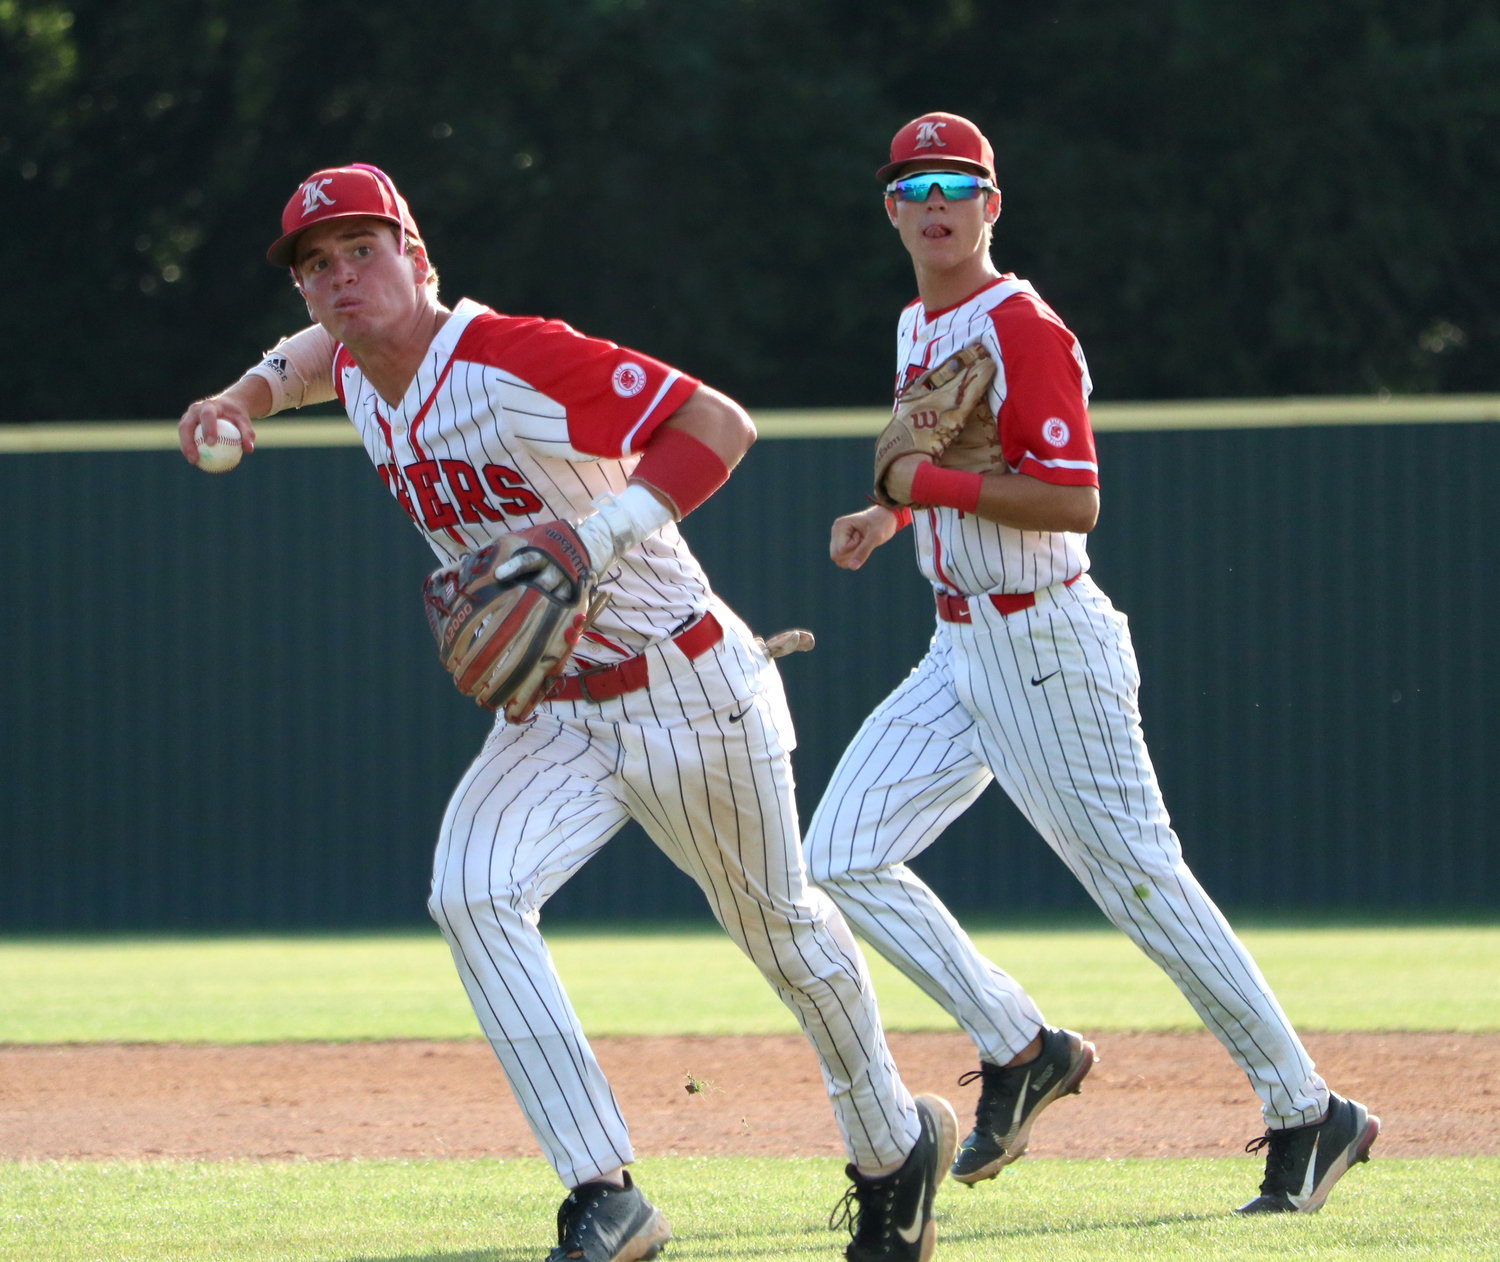 Parker Kidwell throws to first base during Friday’s area round game between Katy and Jersey Village at the Katy baseball field.